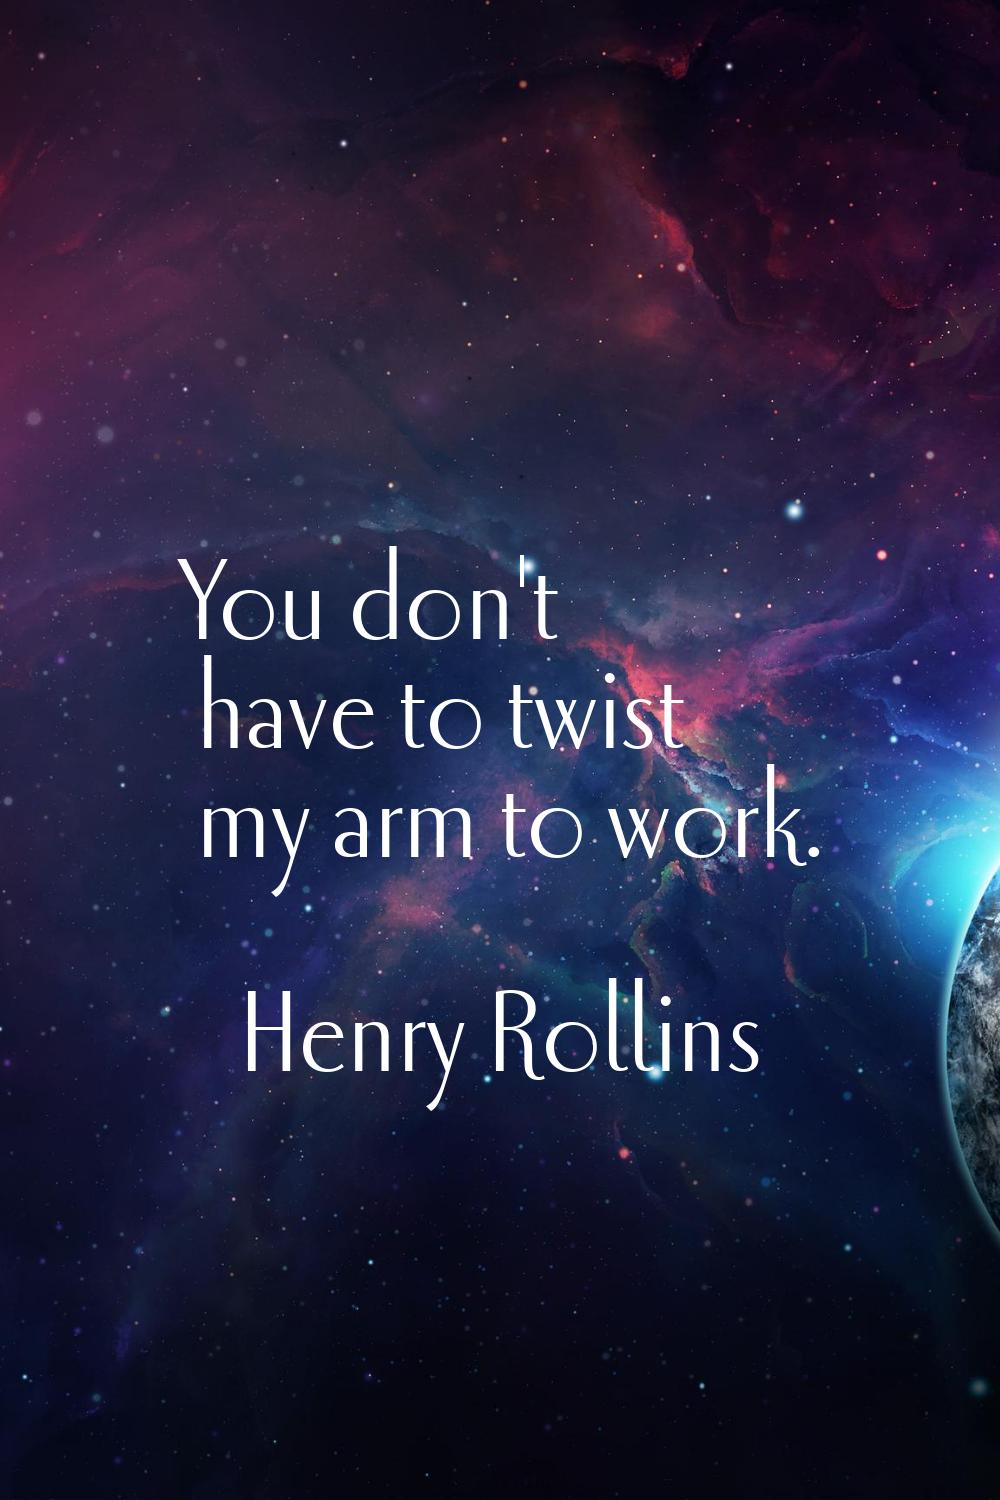 You don't have to twist my arm to work.